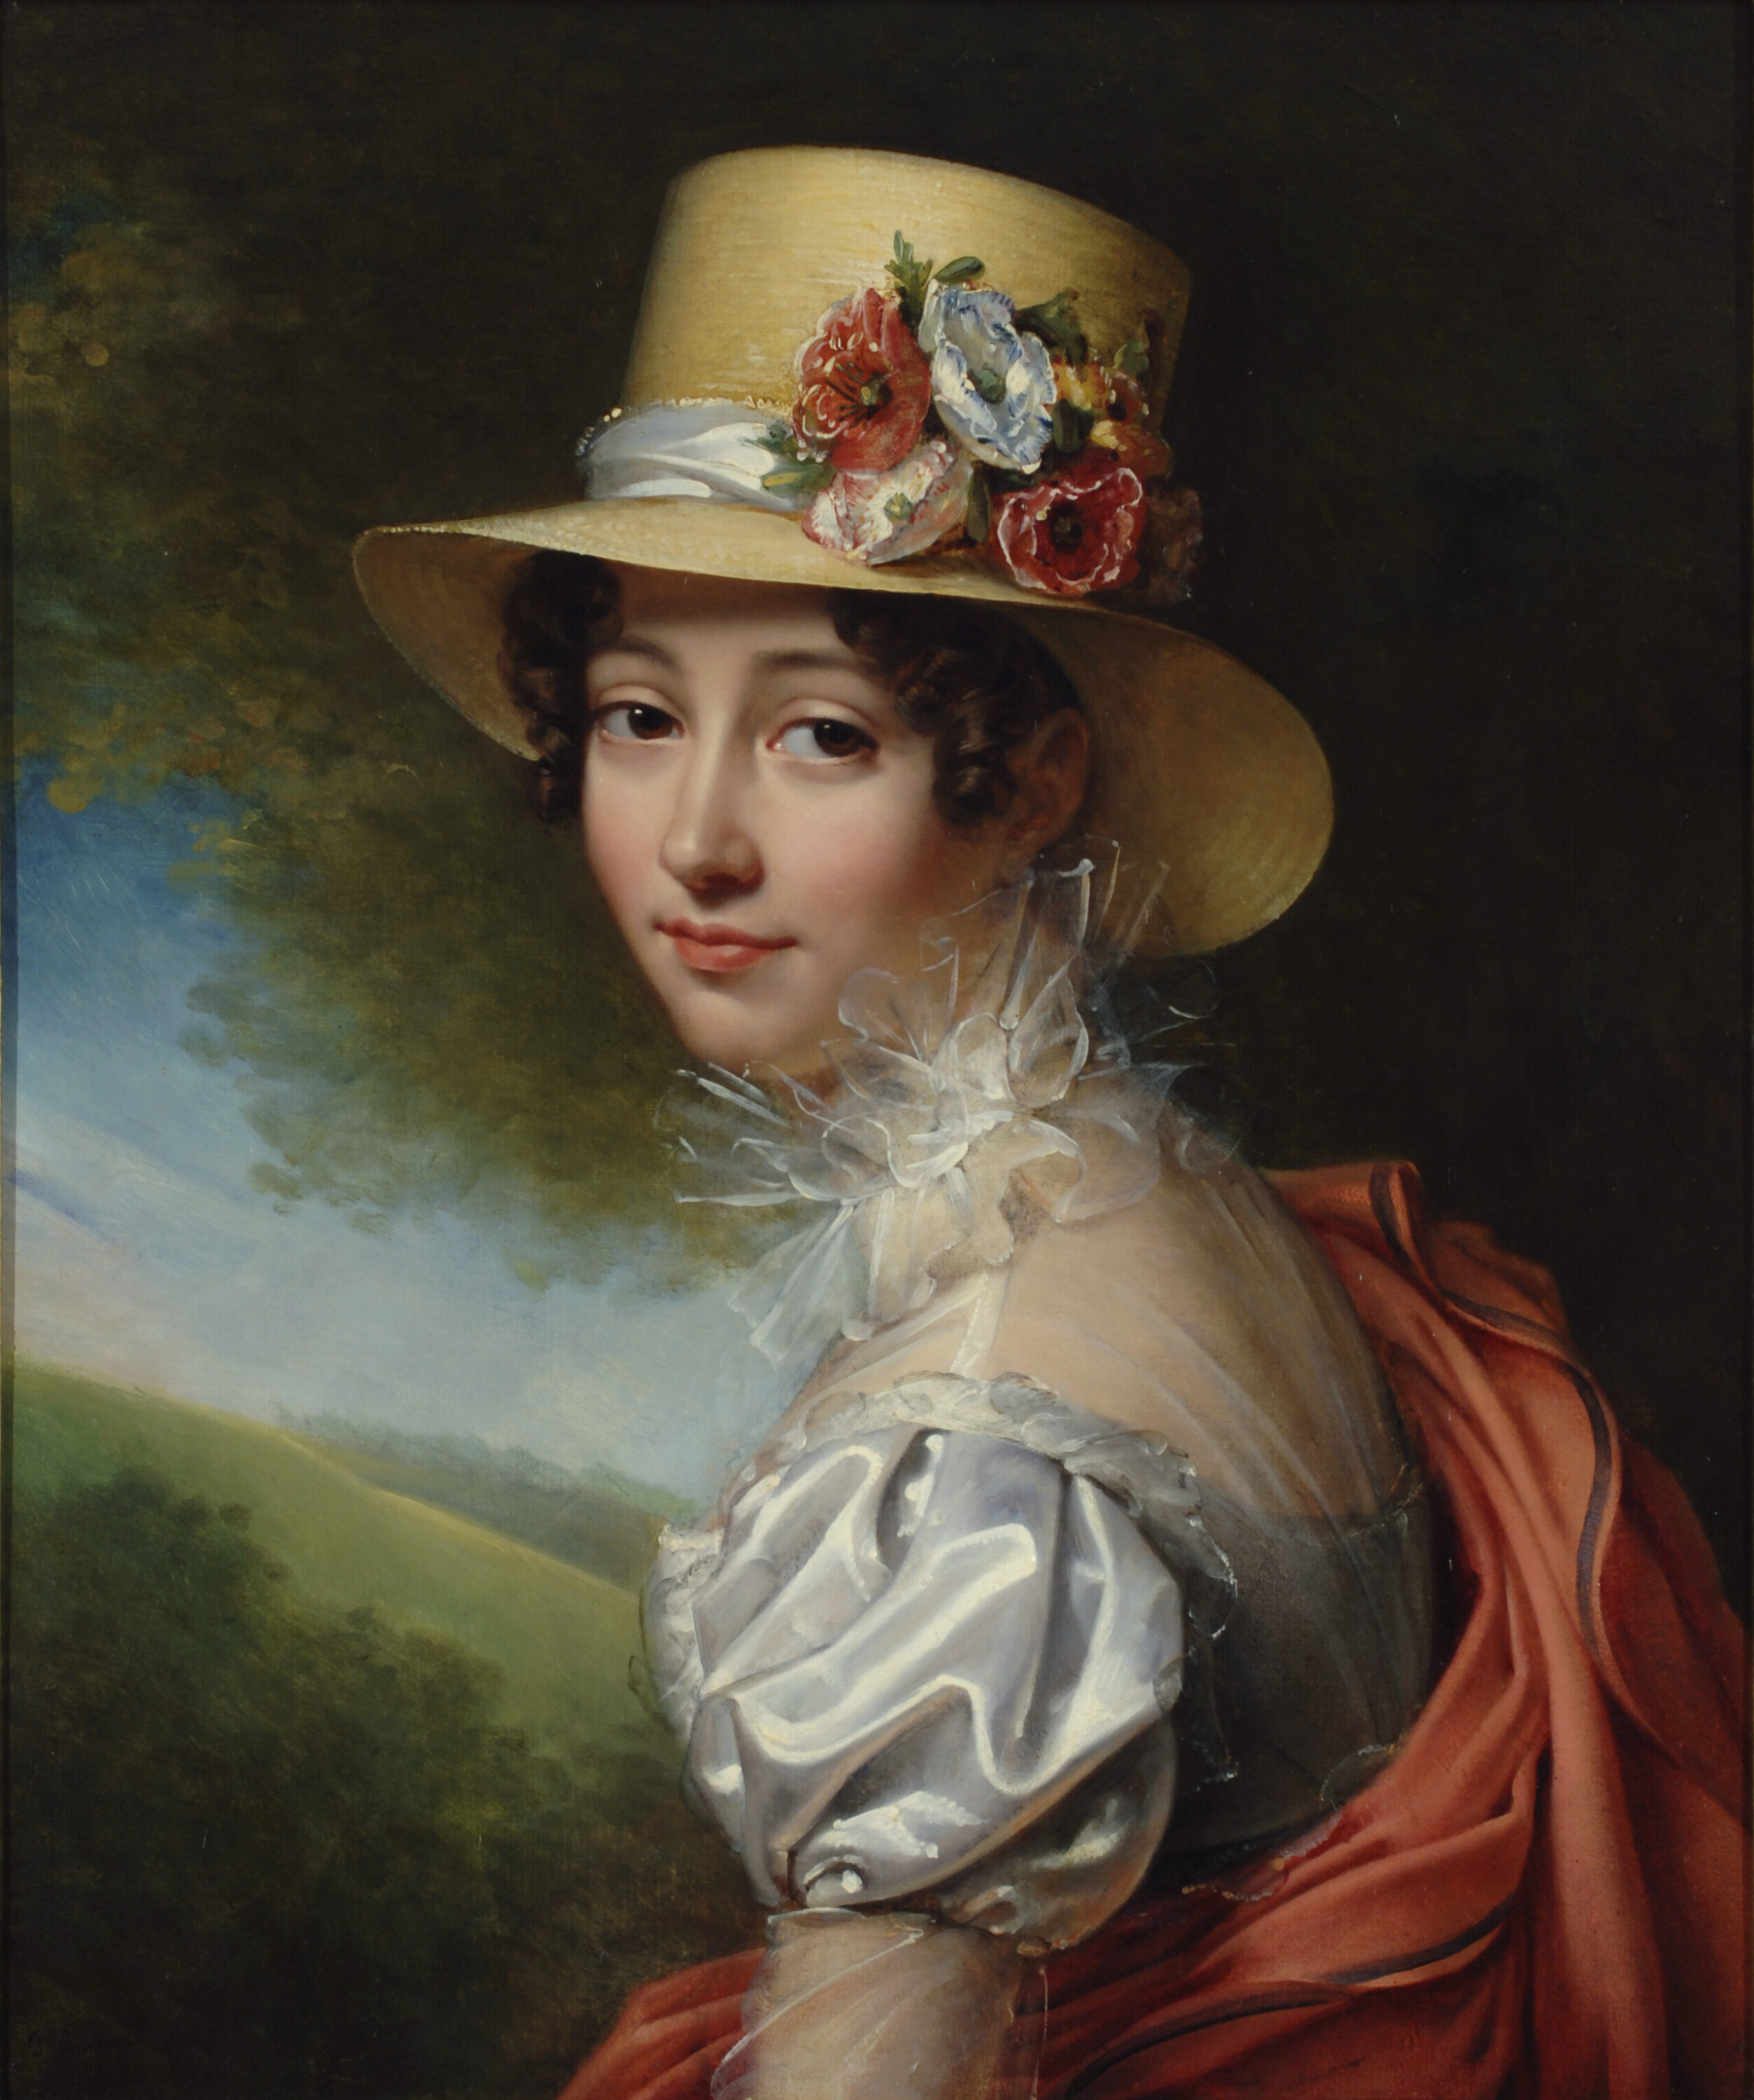 A 3/4 quarters portrait of a light skinned woman wearing a silvery blue puff sleeve gown with a gauzy, lacy collar. She is also wearing a red shawl and a brimmed hat adorned with flowers. She looks out at the viewer with a pleasant look.